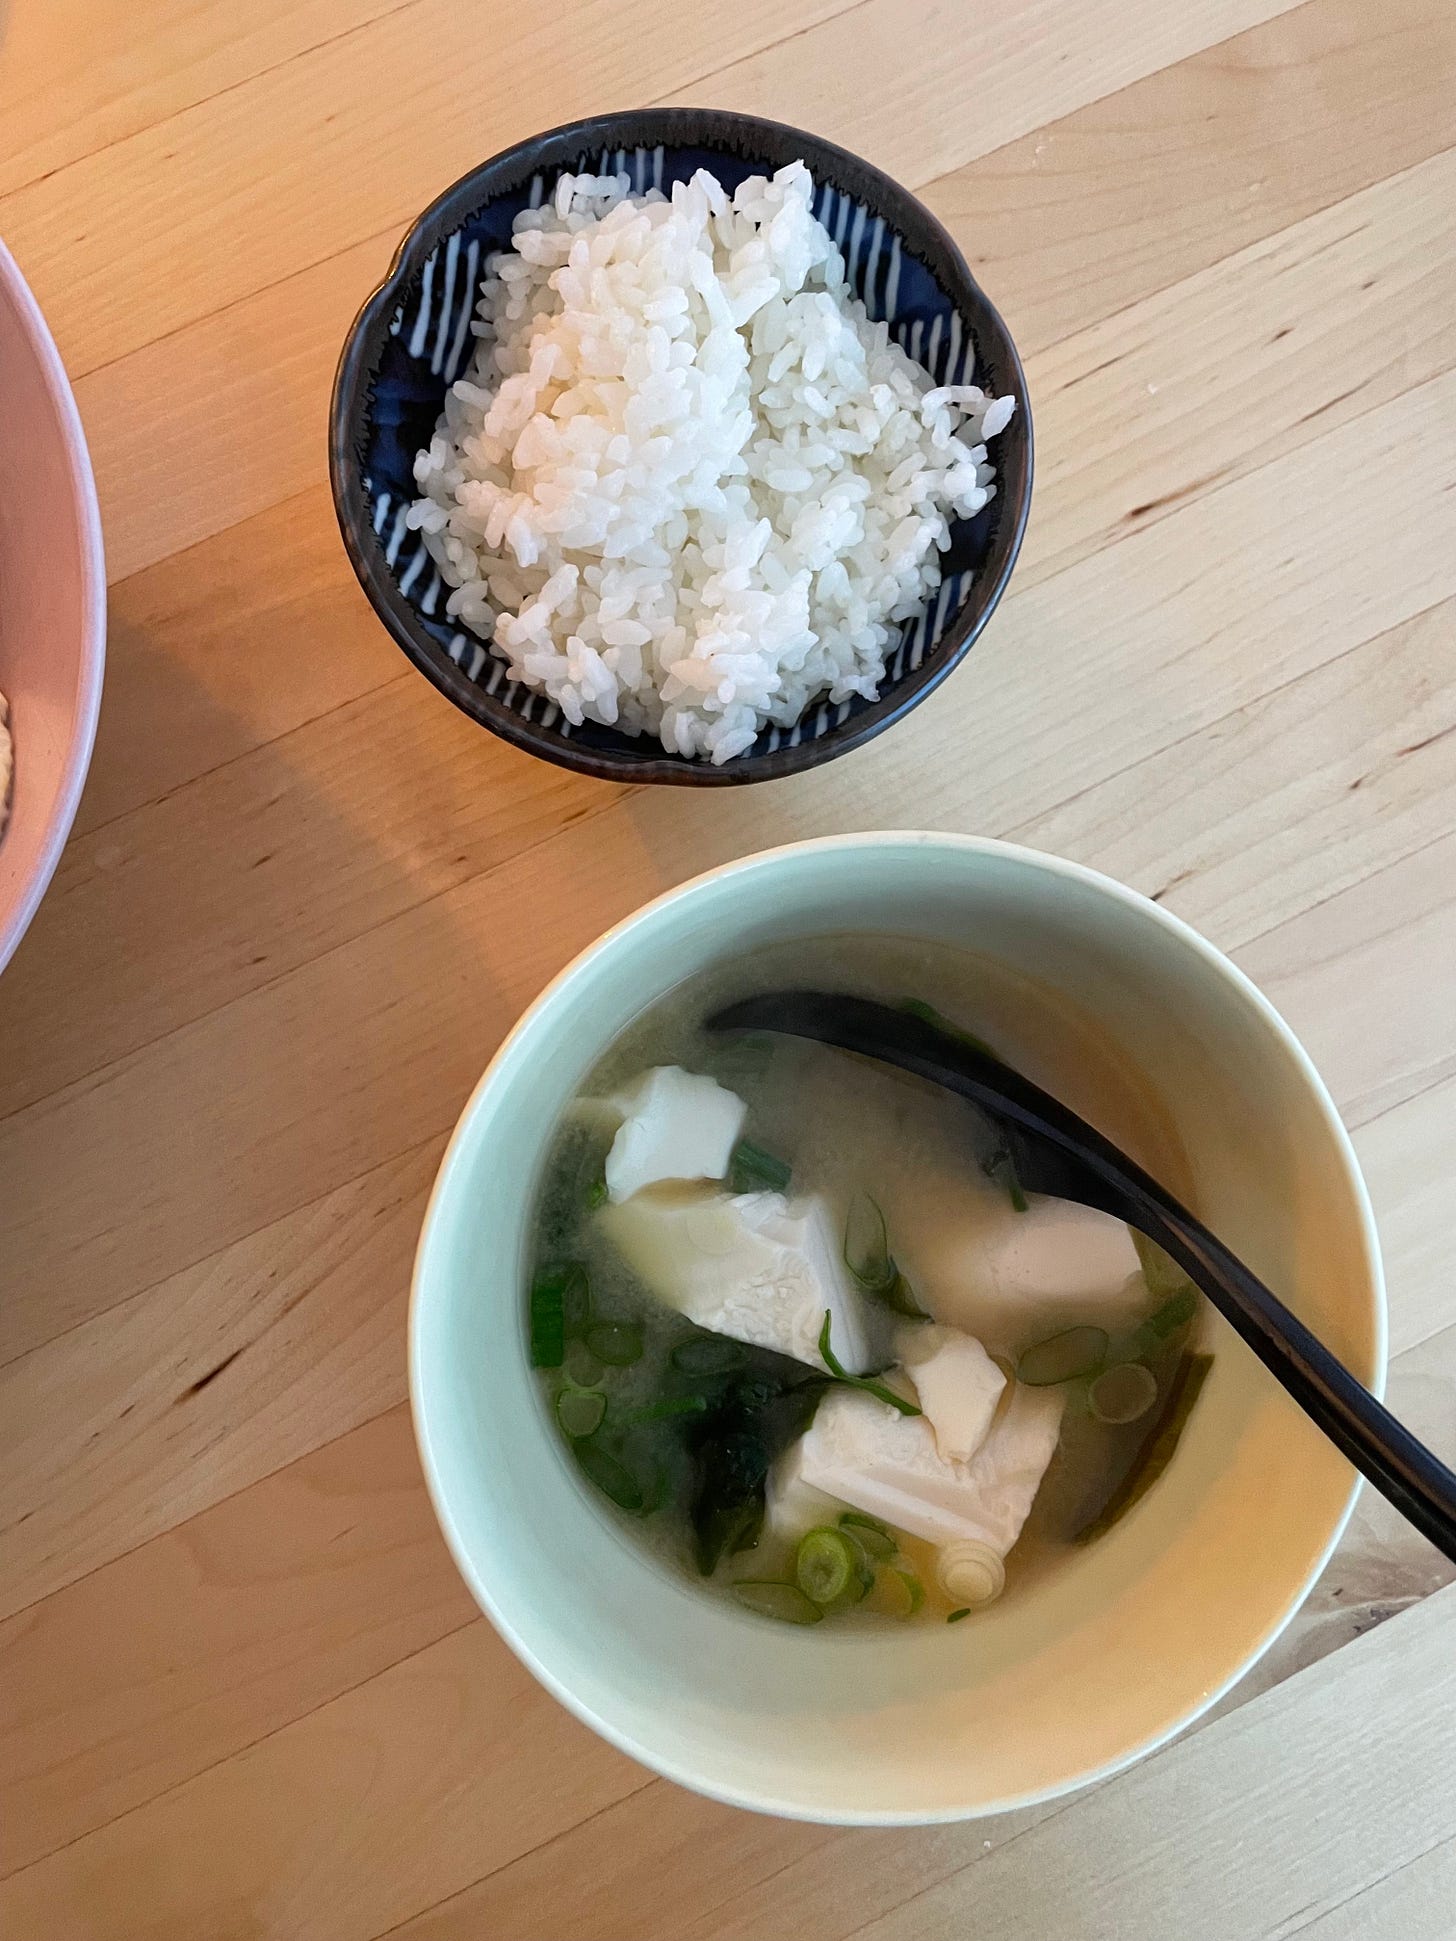 Comforting dinner made from a bowl of sushi rice, and a larger bowl of miso soup